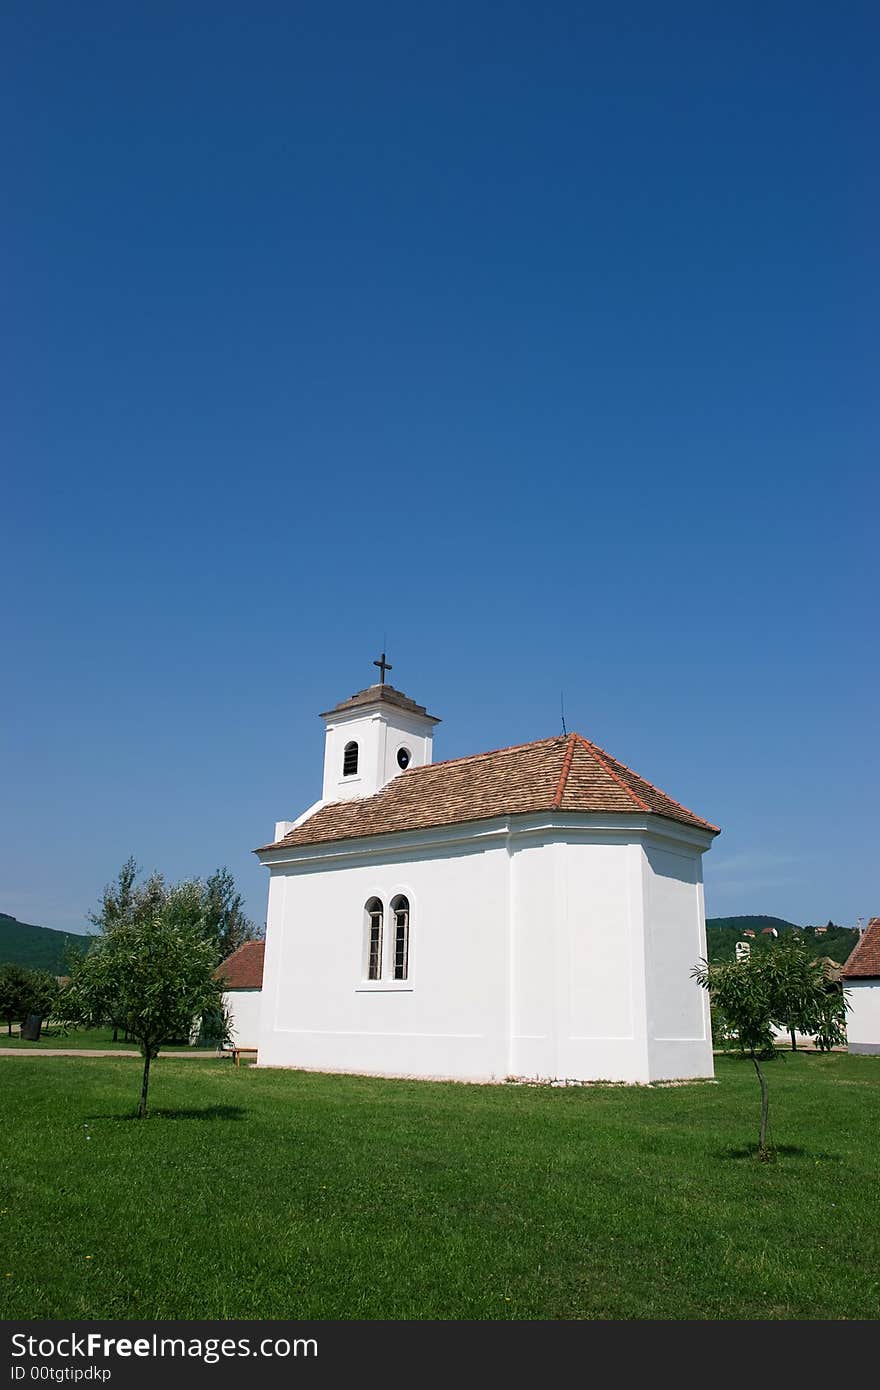 Old little church with blue sky